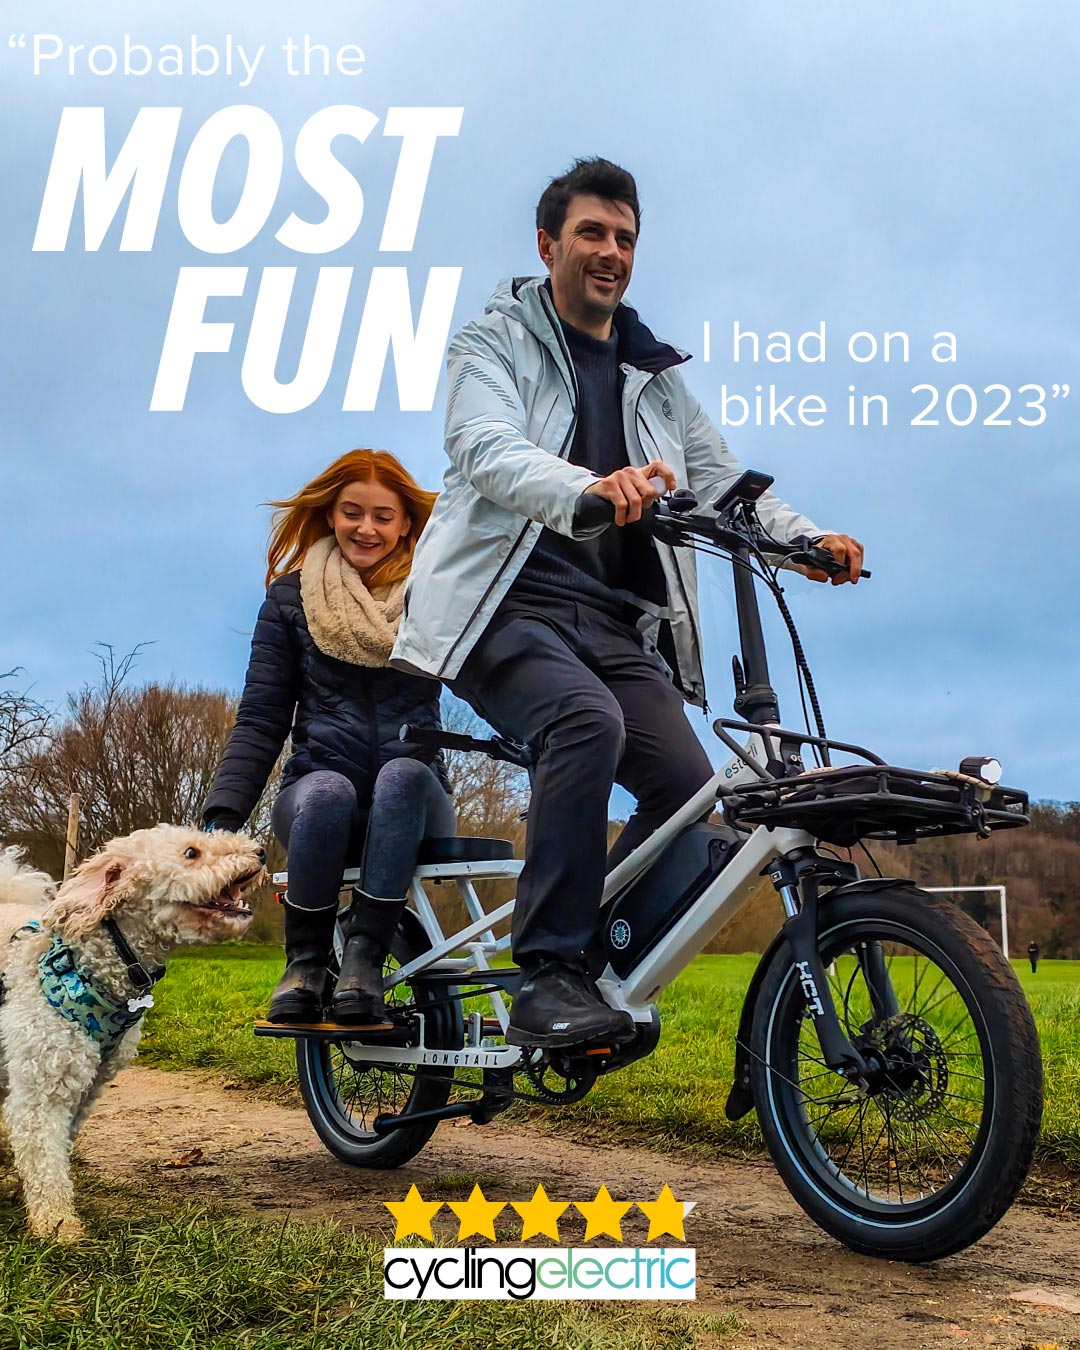 Mark Sutton, Editor of Cycling Electric says the Estarli E-cargo is, "probably the most fun I have had on a bike in 2023"